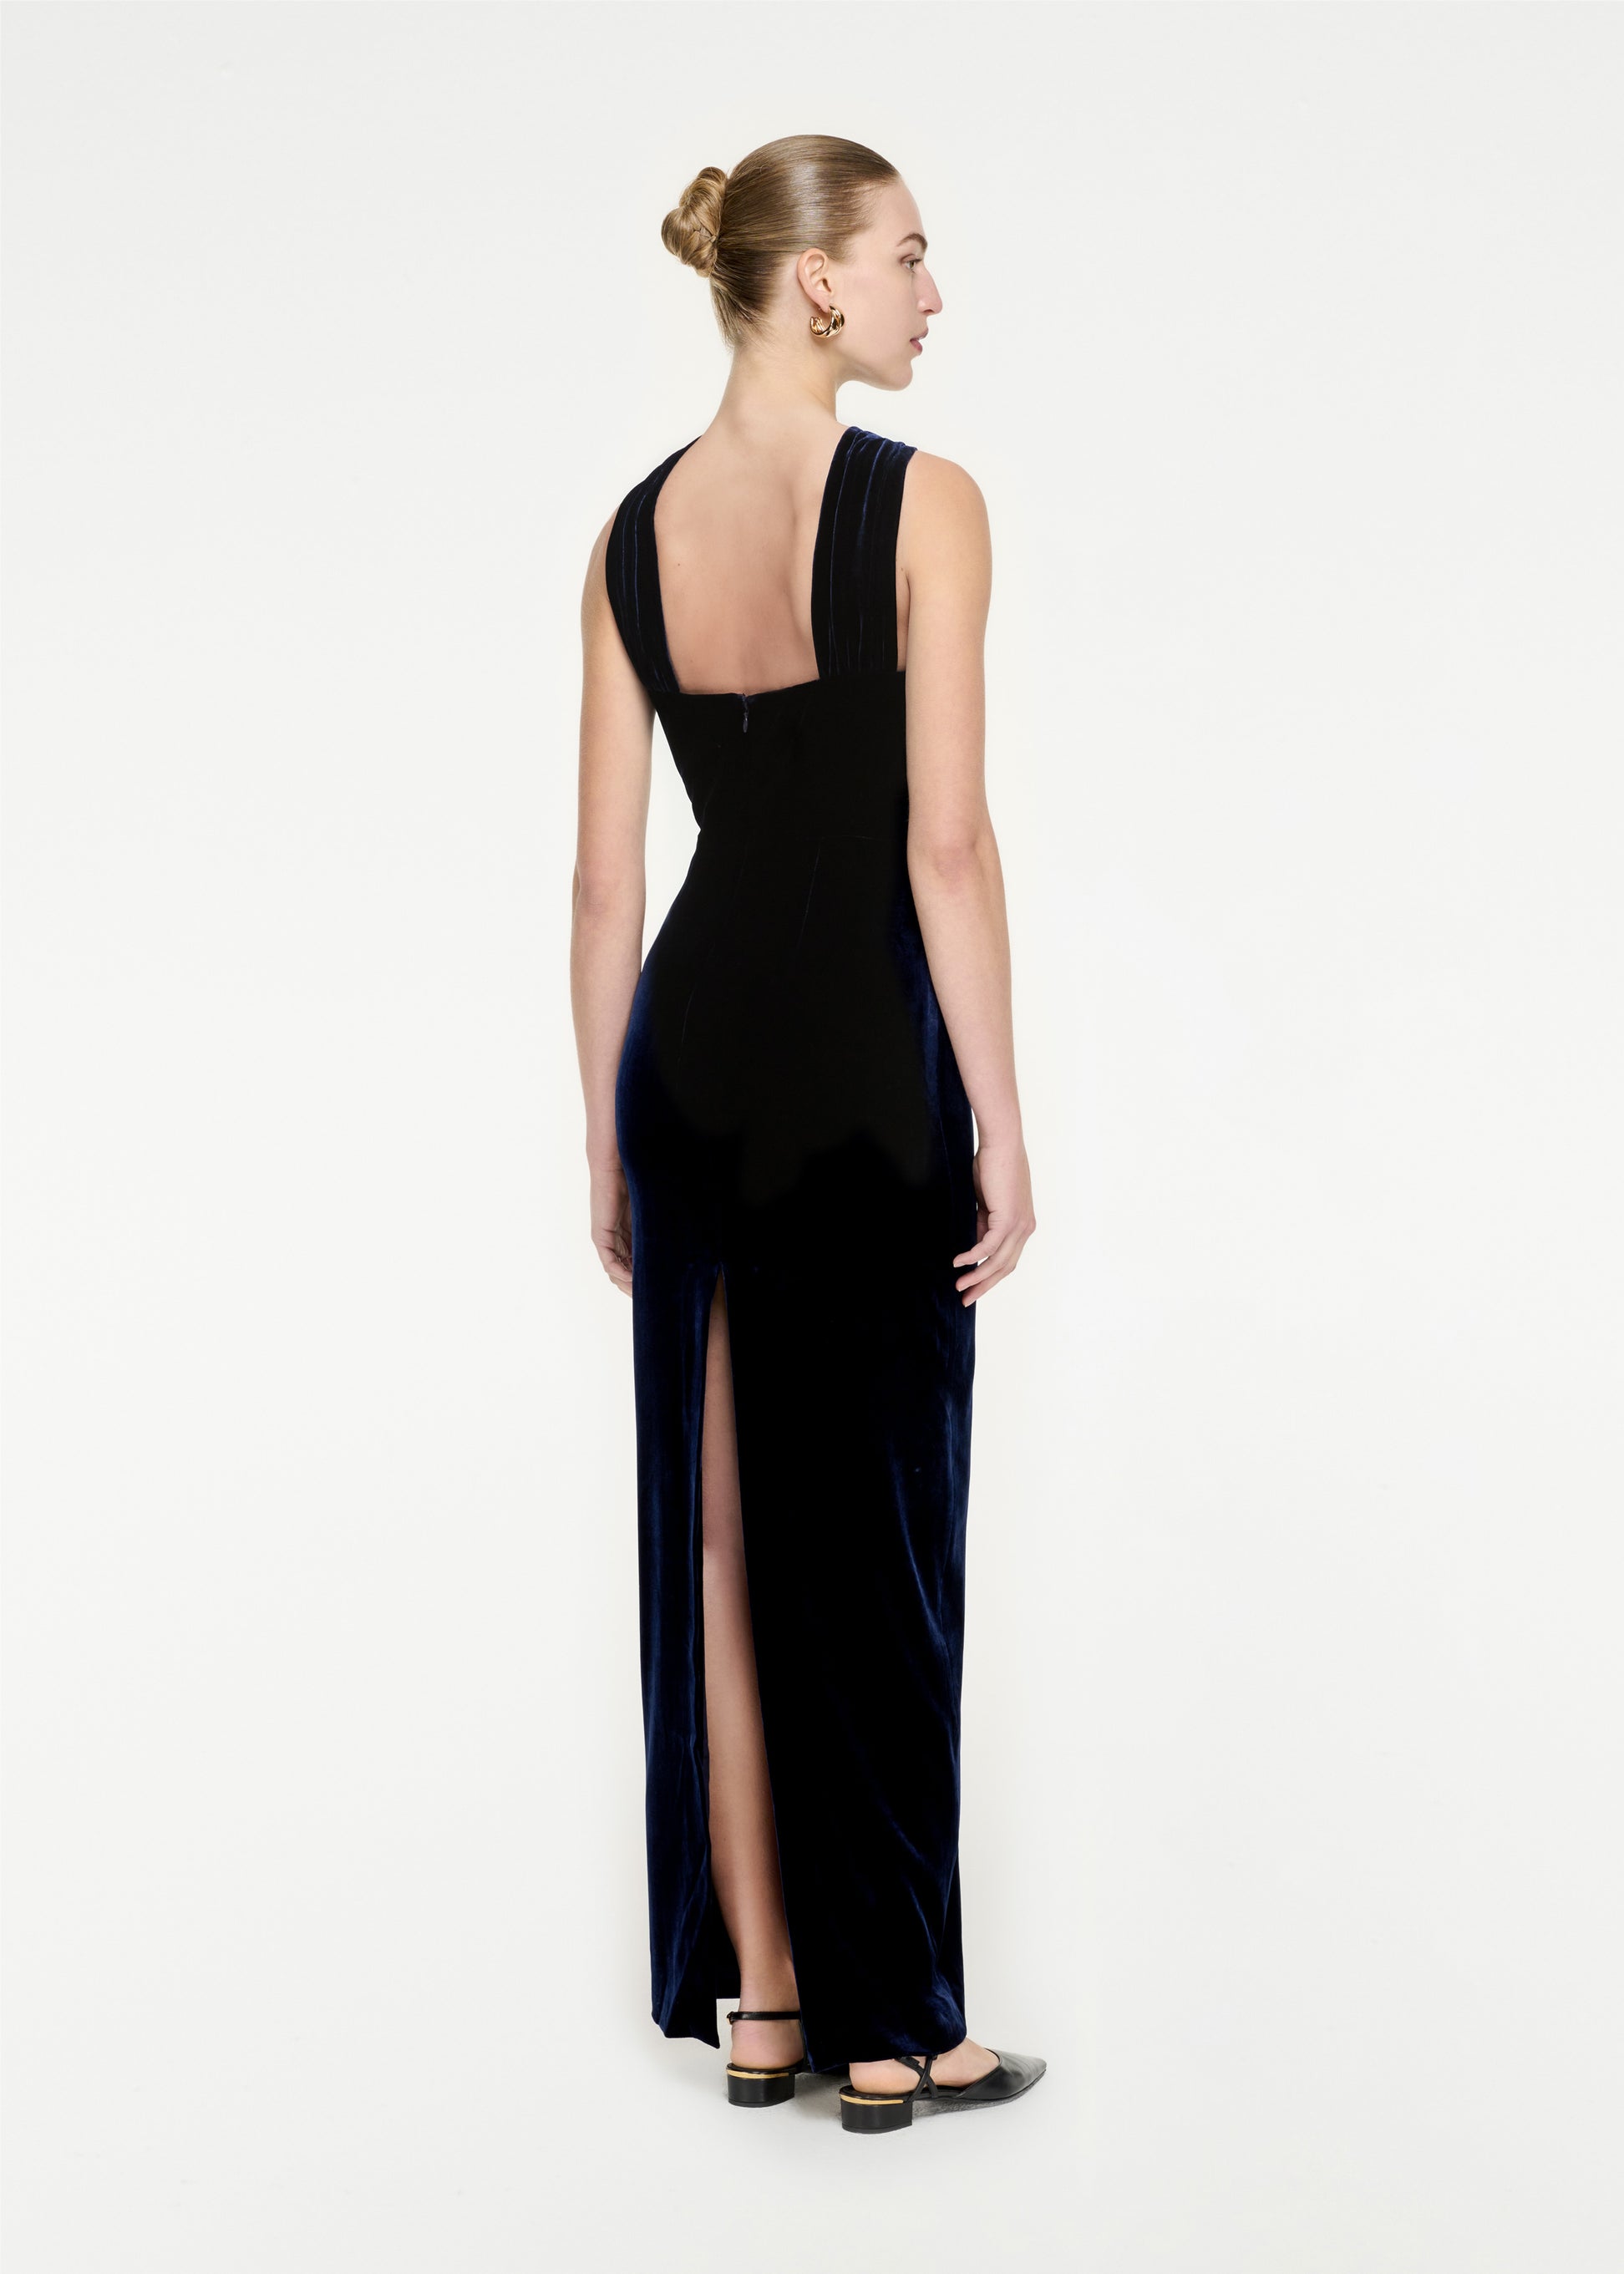 The back of a woman wearing the Asymmetric Velvet Maxi Dress in Navy